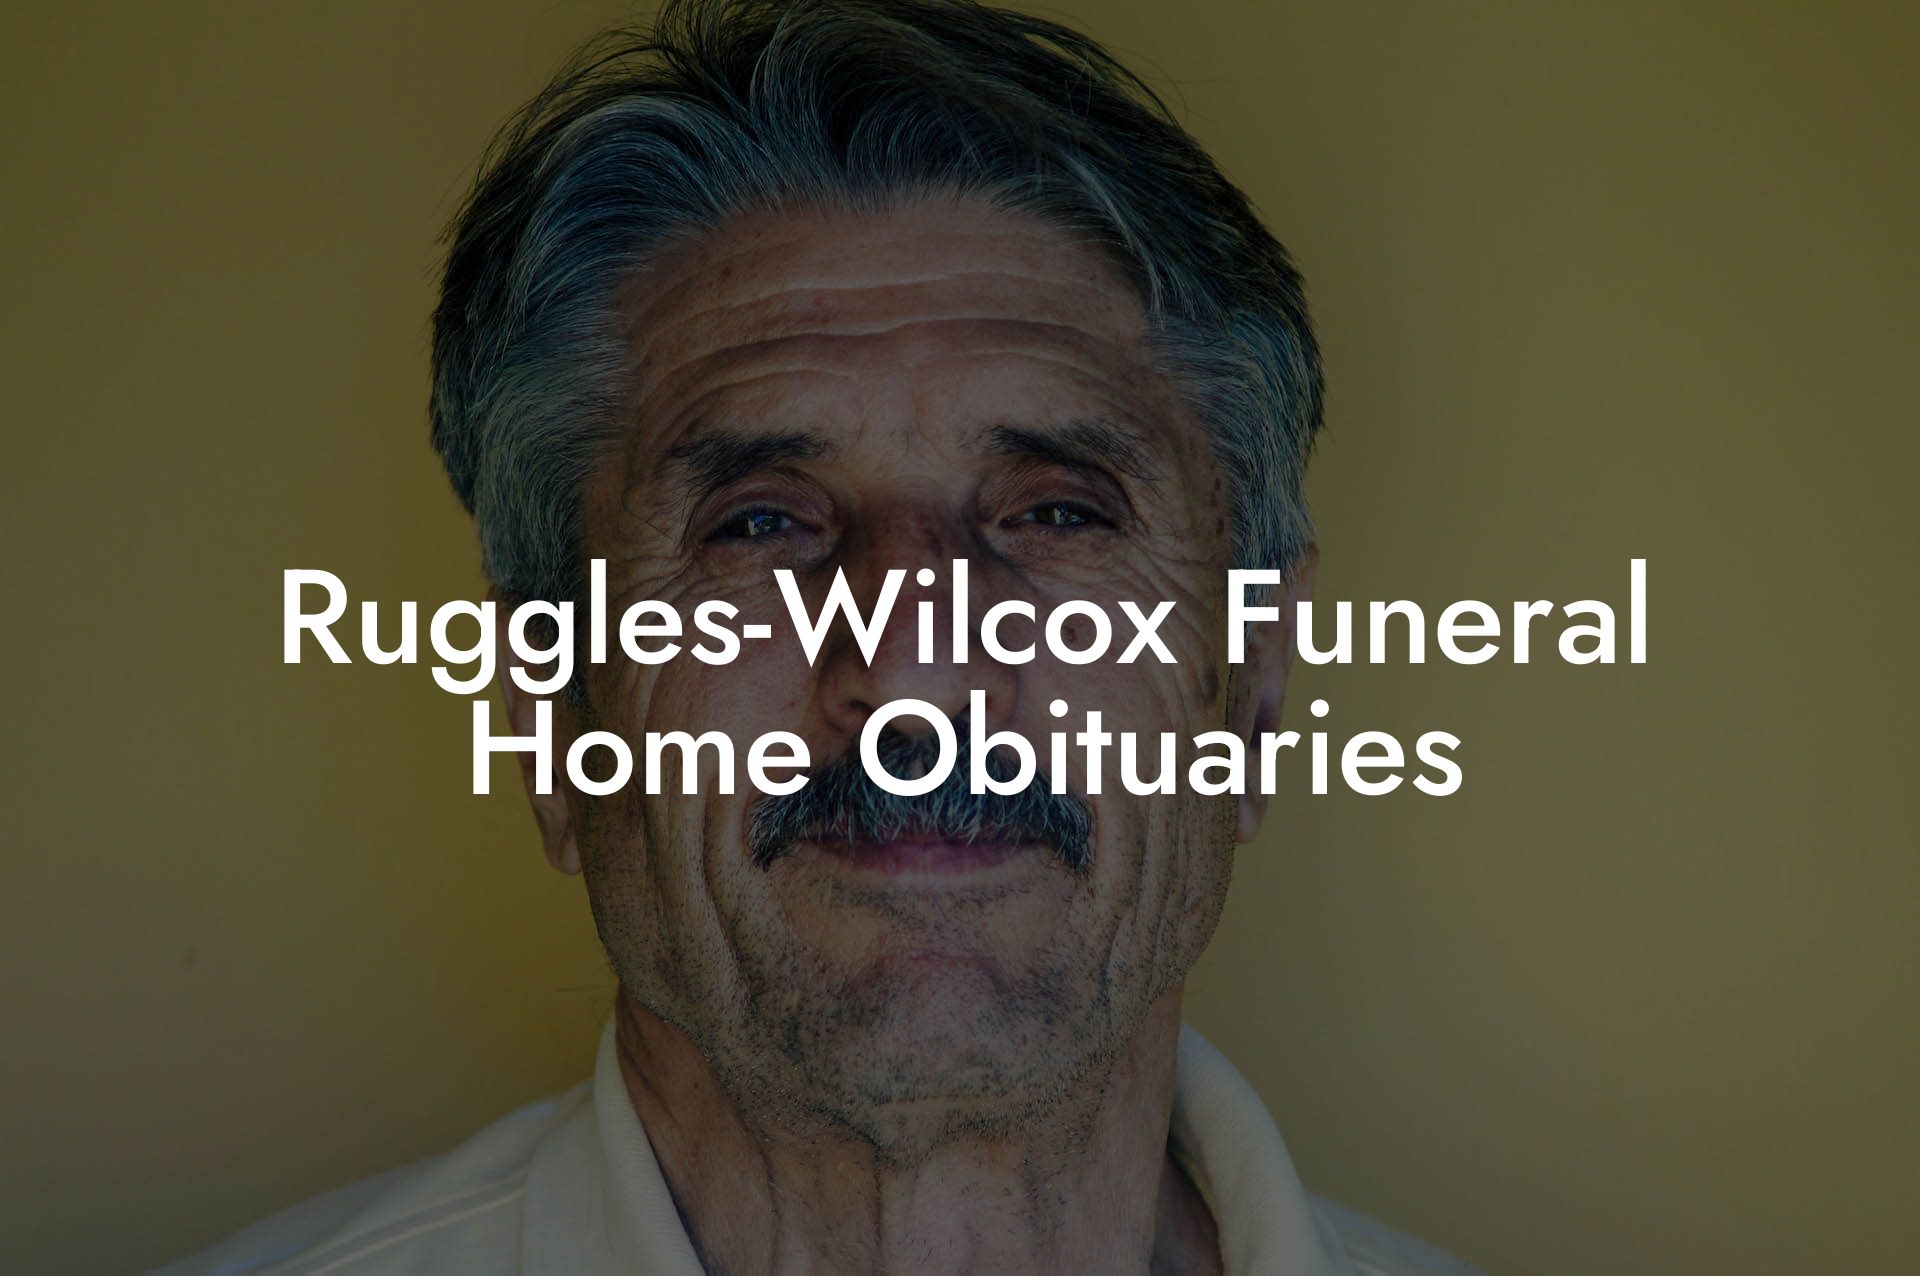 Ruggles-Wilcox Funeral Home Obituaries